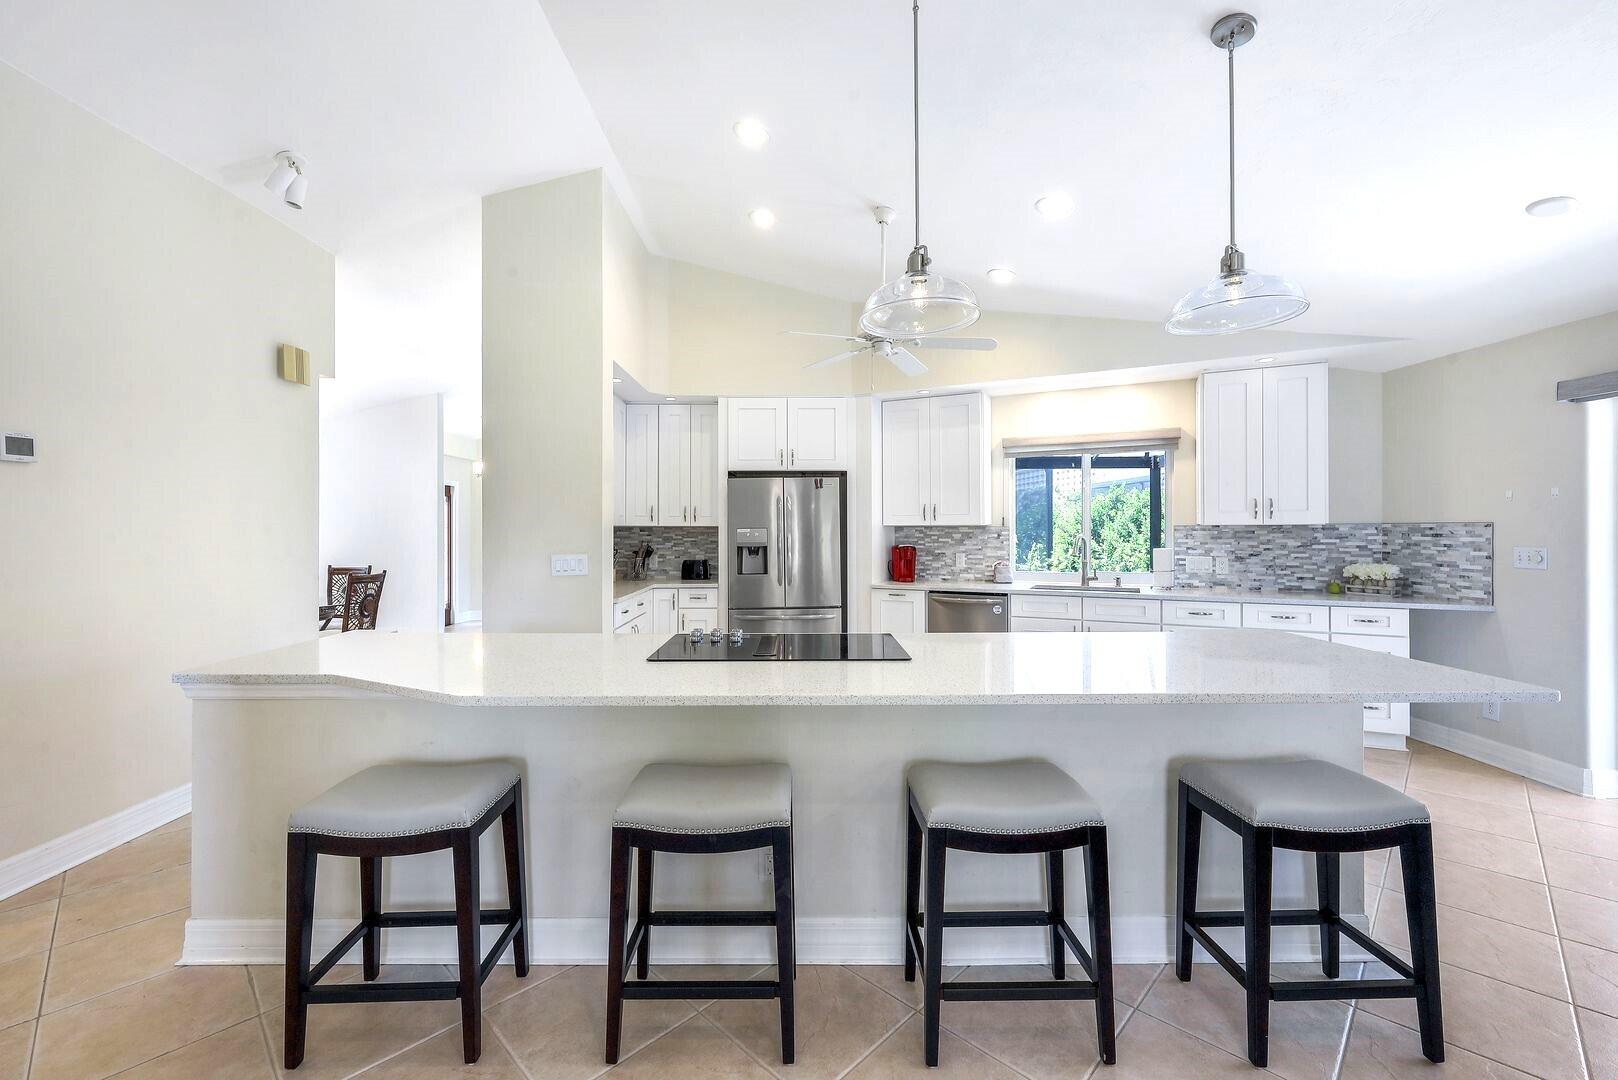 a kitchen with stainless steel appliances kitchen island a chandelier and refrigerator